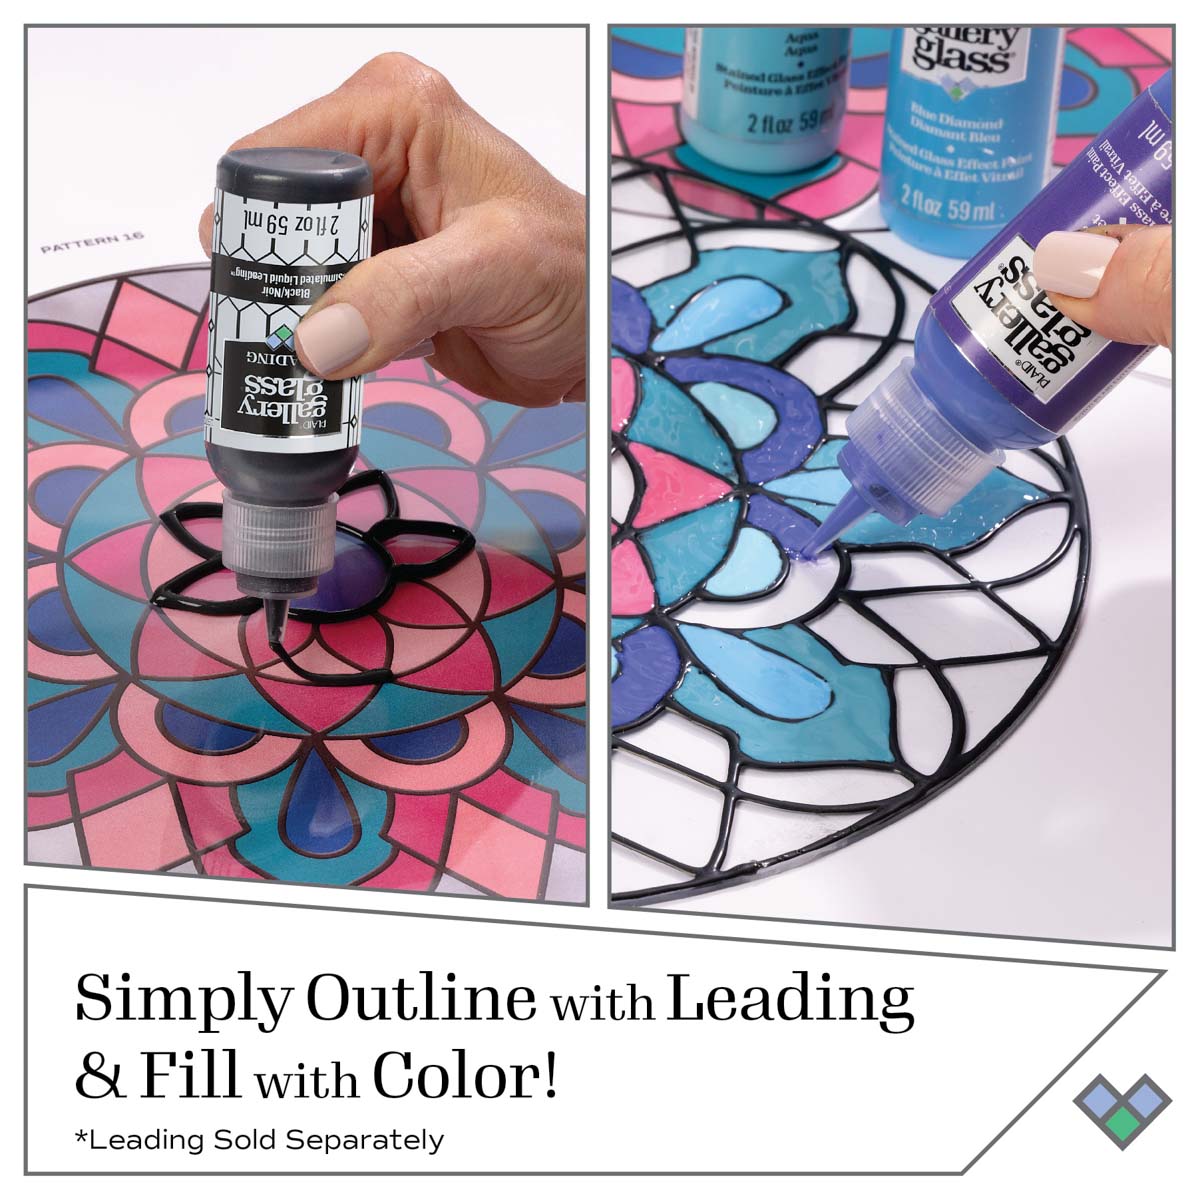 Shop Plaid Gallery Glass ® Stained Glass Effect Paint - Bright White, 2 oz.  - 19692 - 19692